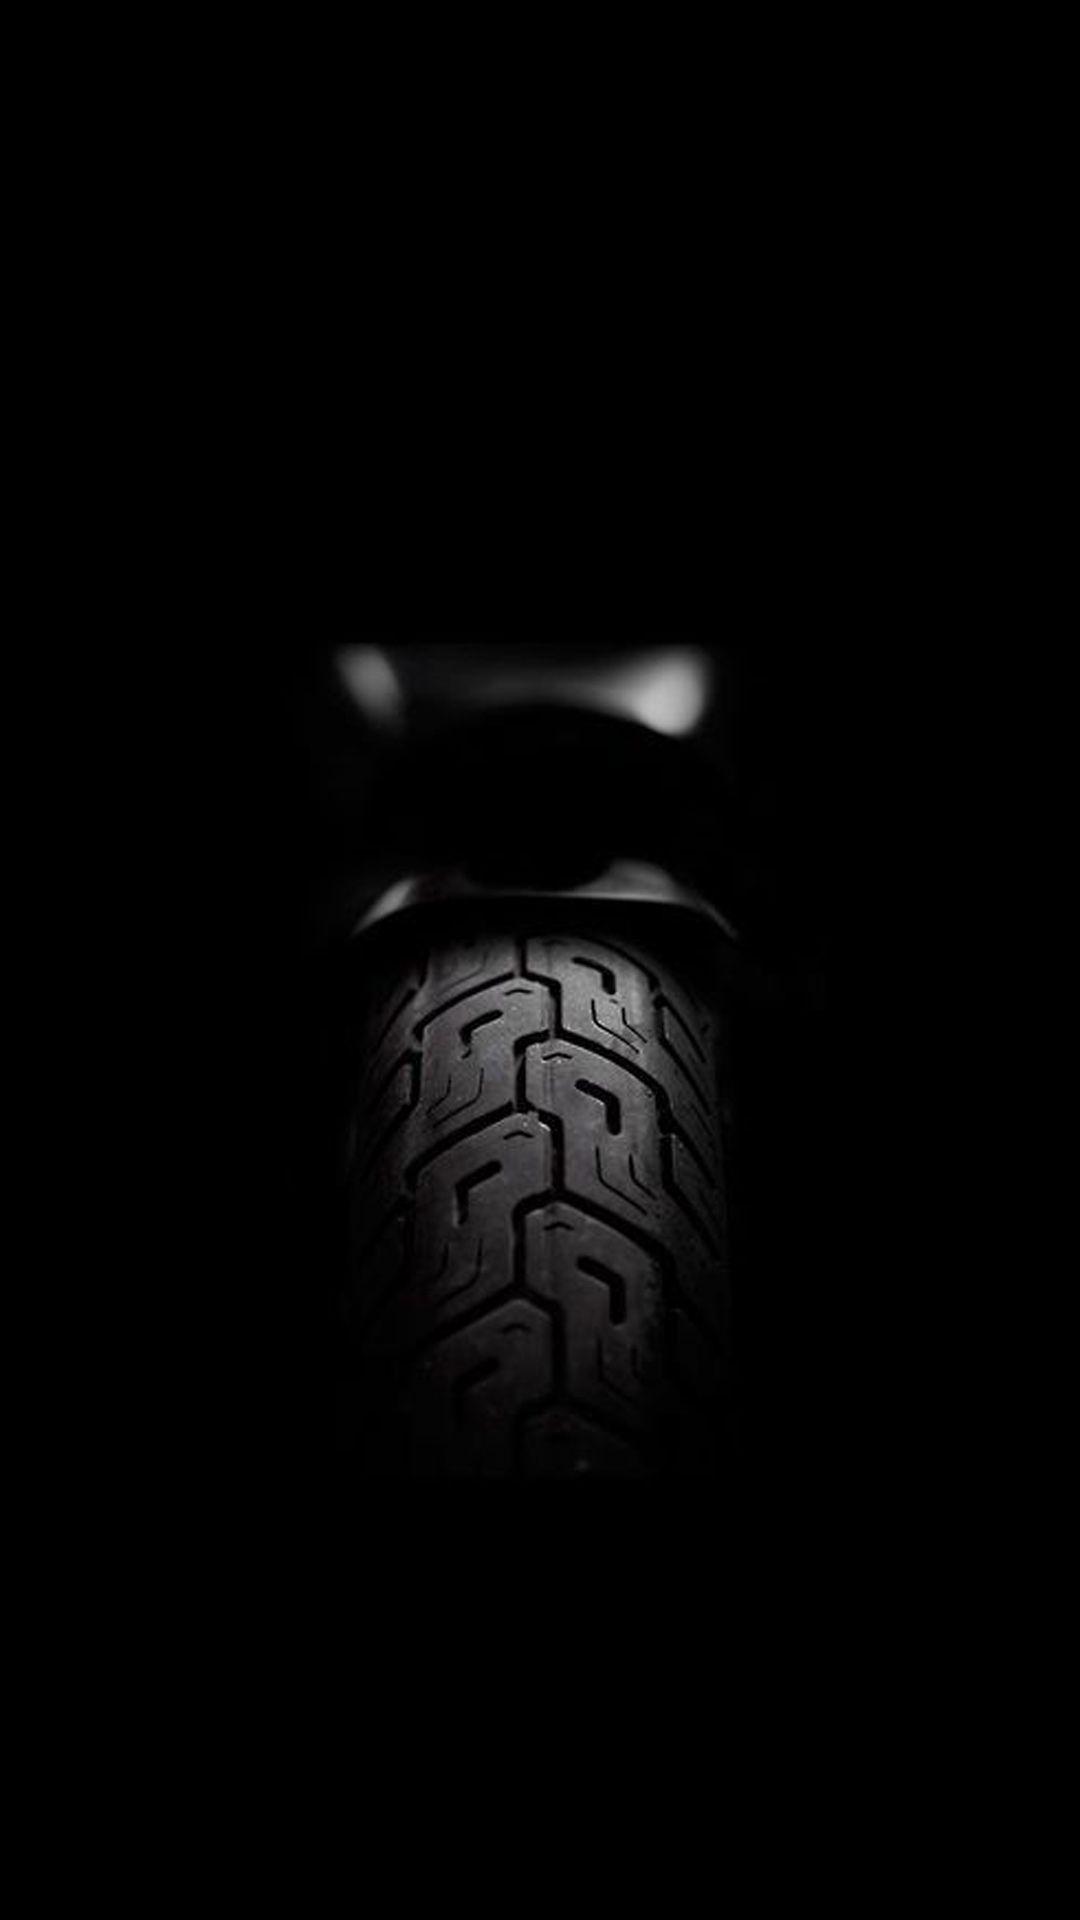 Black Motorcycle Wallpapers - Top Free Black Motorcycle Backgrounds